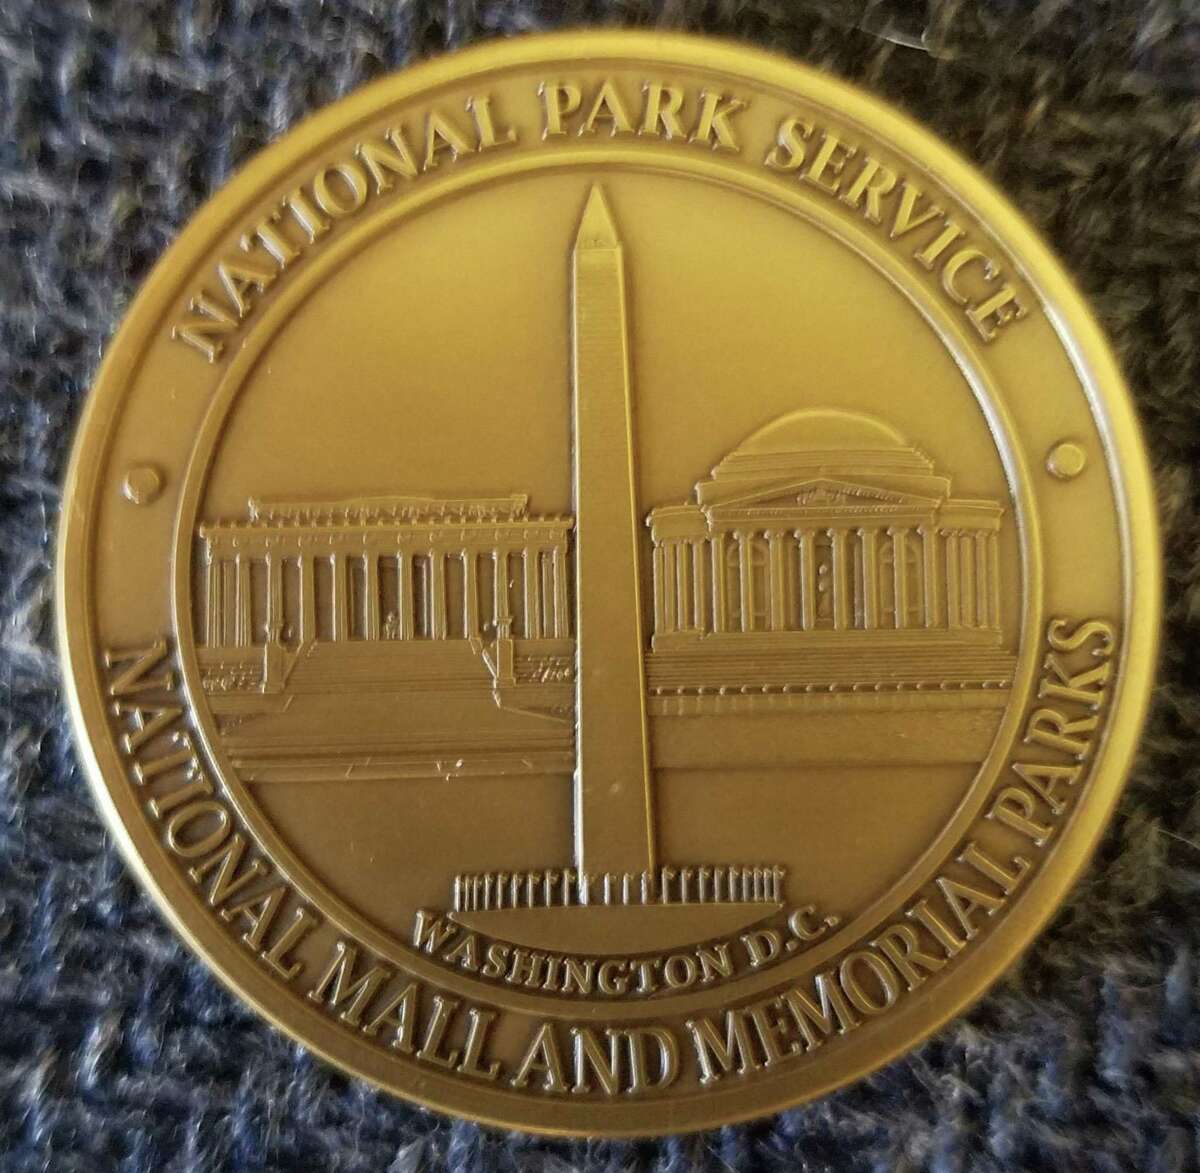 The youth group at Our Lady of Lakes in New Milford was presented this special, limited edition commemorative coin for their mission work in Washington, D.C. during a recent trip.